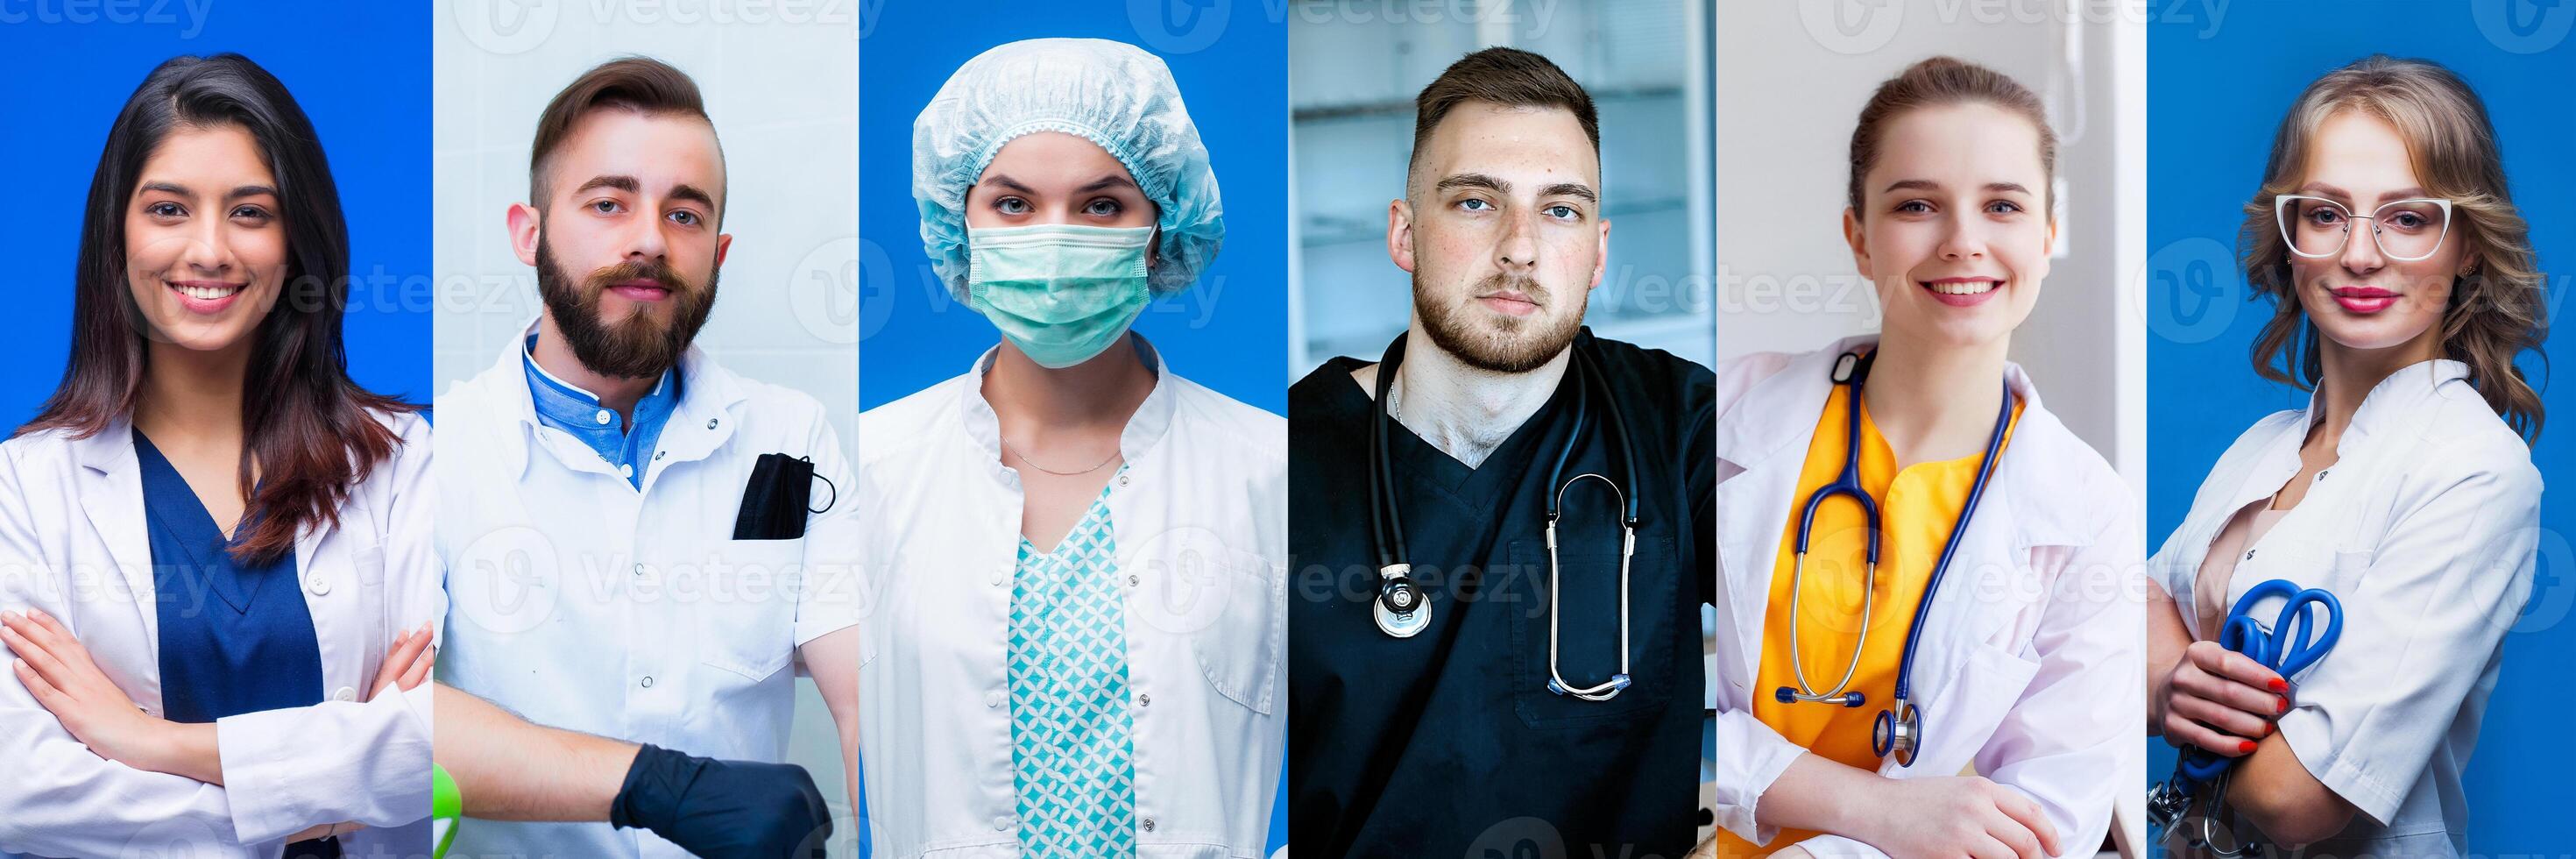 Collection of professional doctors portraits with smiling successful medical workers, physicians and nurses from different countries. Advertising banner, collage, panorama. photo